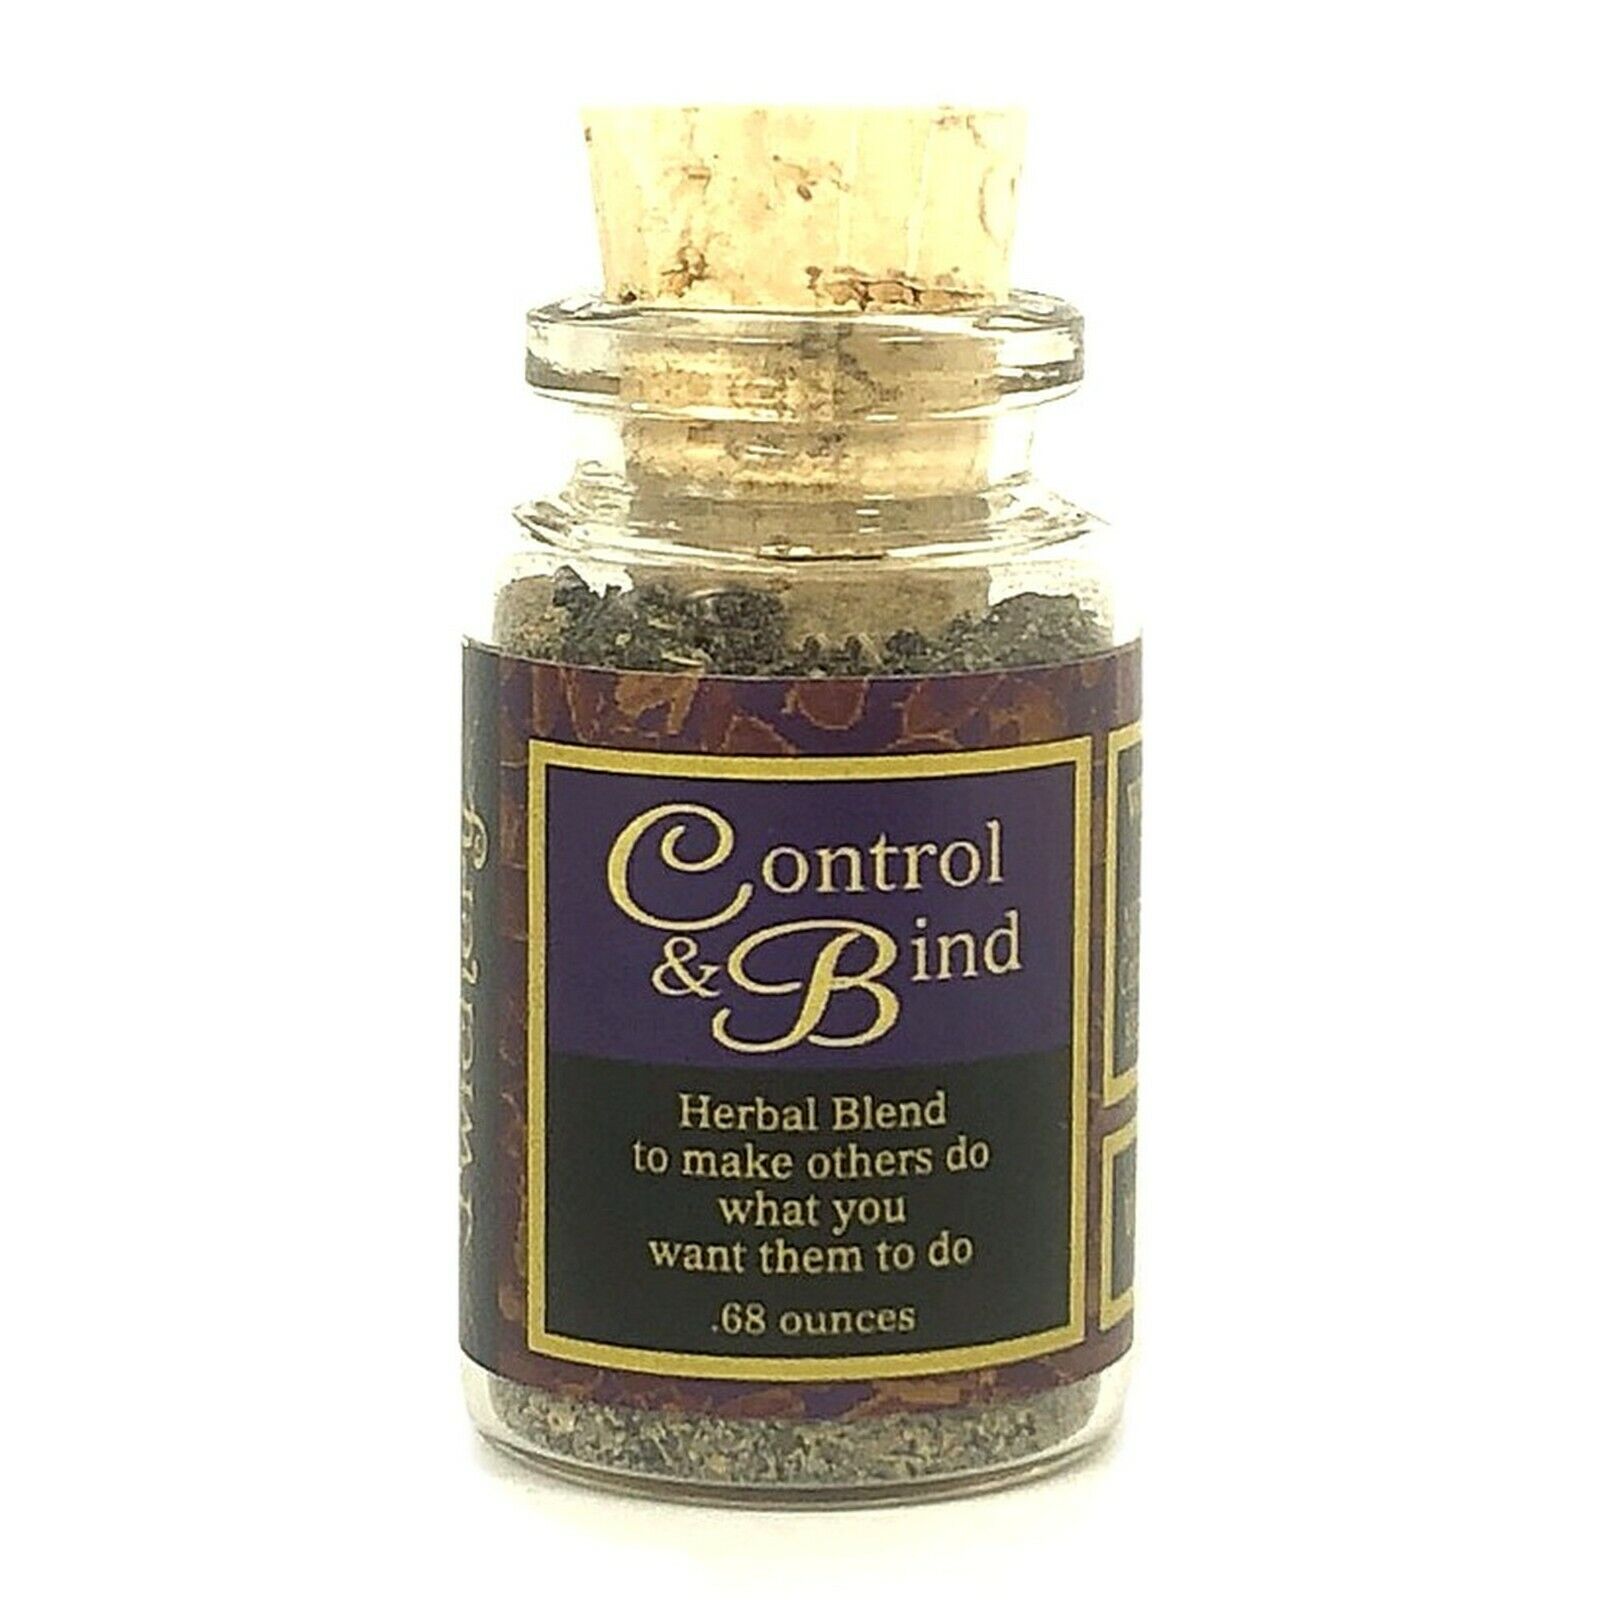 CONTROLLING SPELL POWDER, Do As I Say, Hoodoo Voodoo, Wicca, Pagan FROM TWICHERY